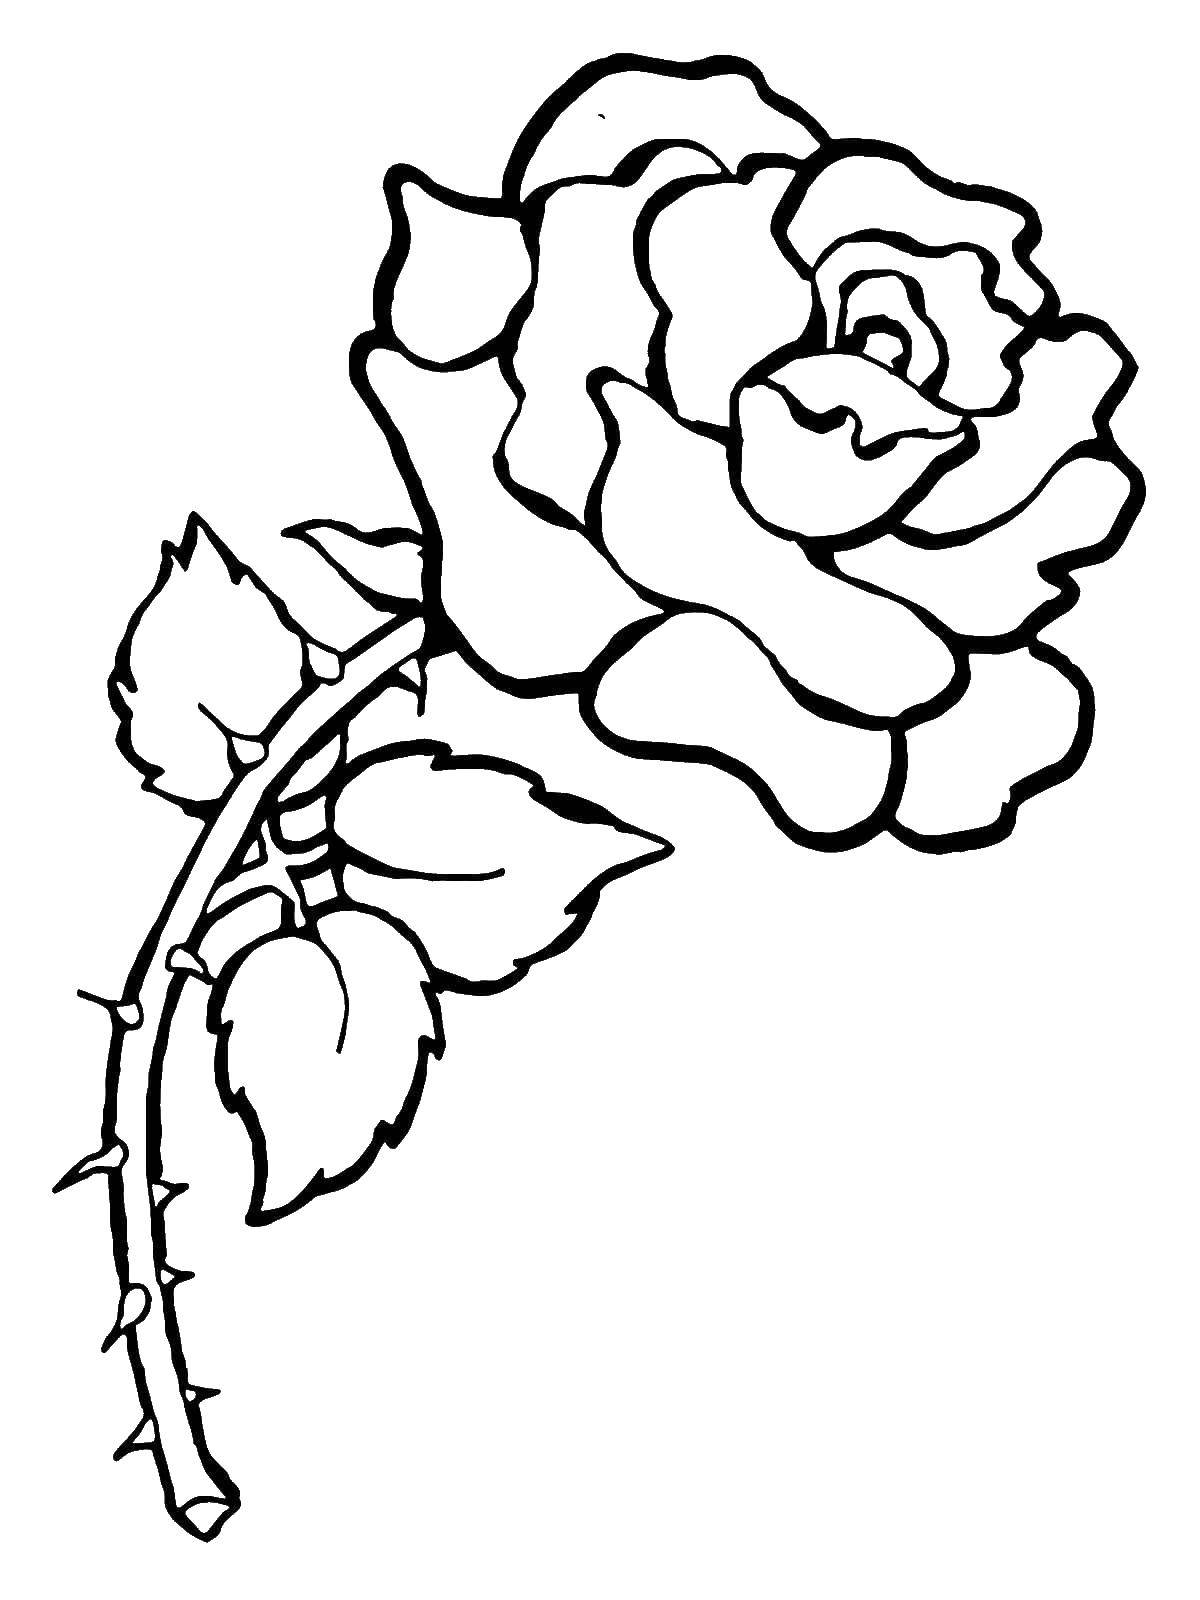 Coloring Beautiful rose with thorns. Category Flowers. Tags:  Flowers, roses.